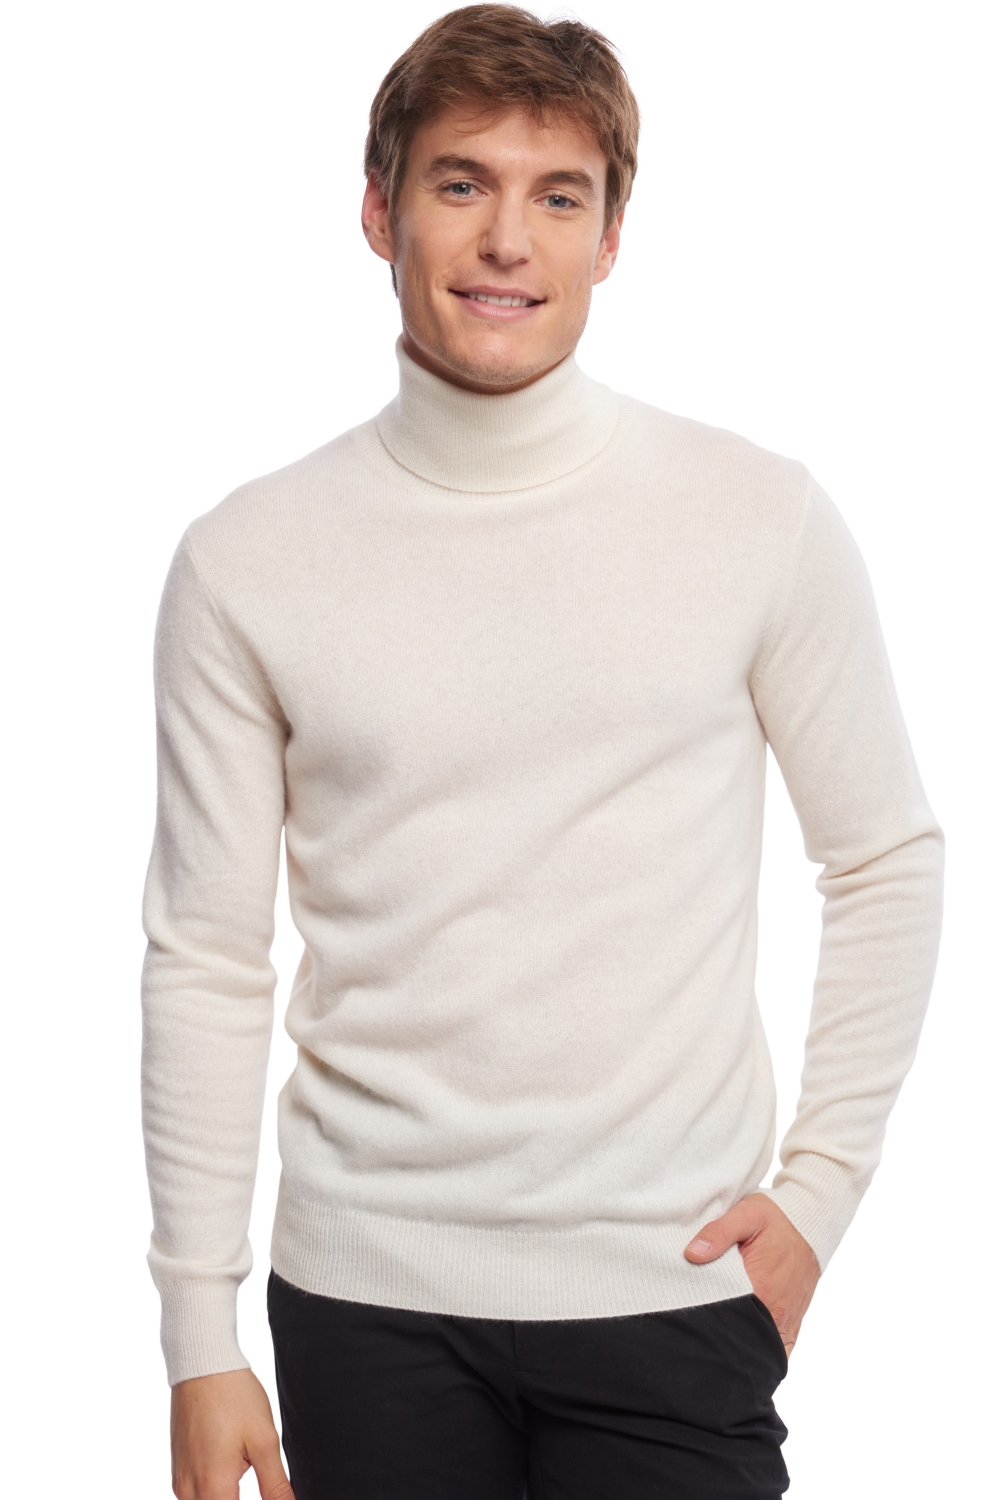 Cashmere men basic sweaters at low prices tarry first simili white 2xl